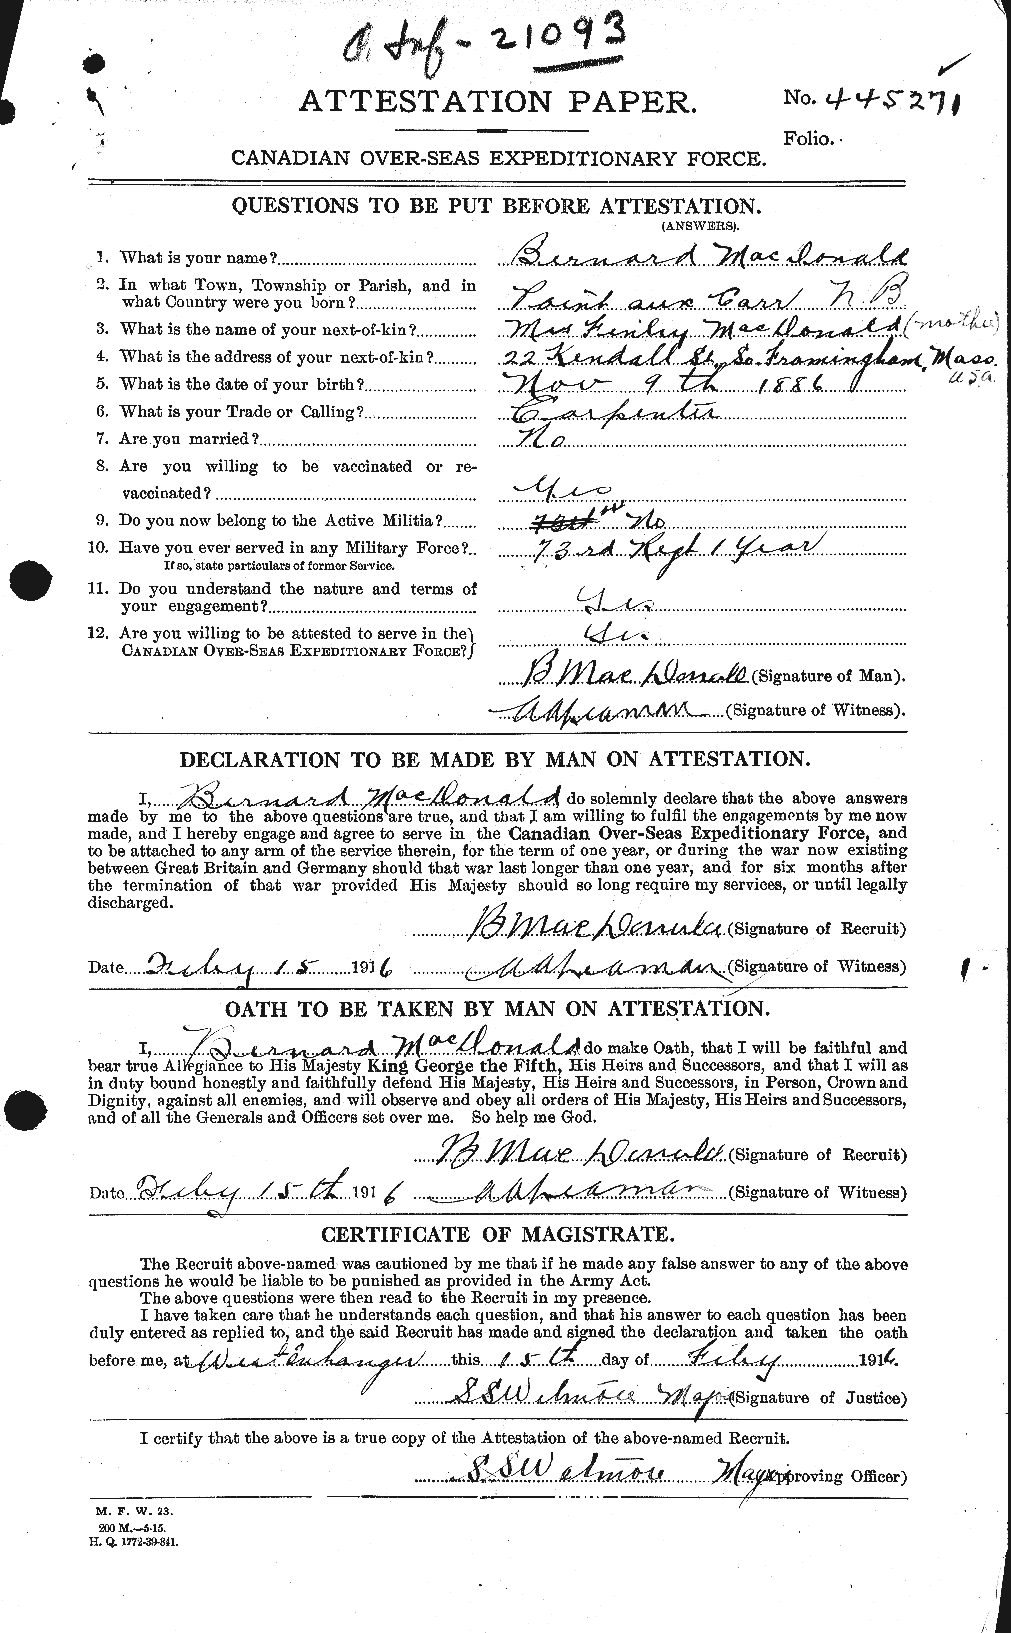 Personnel Records of the First World War - CEF 136515a